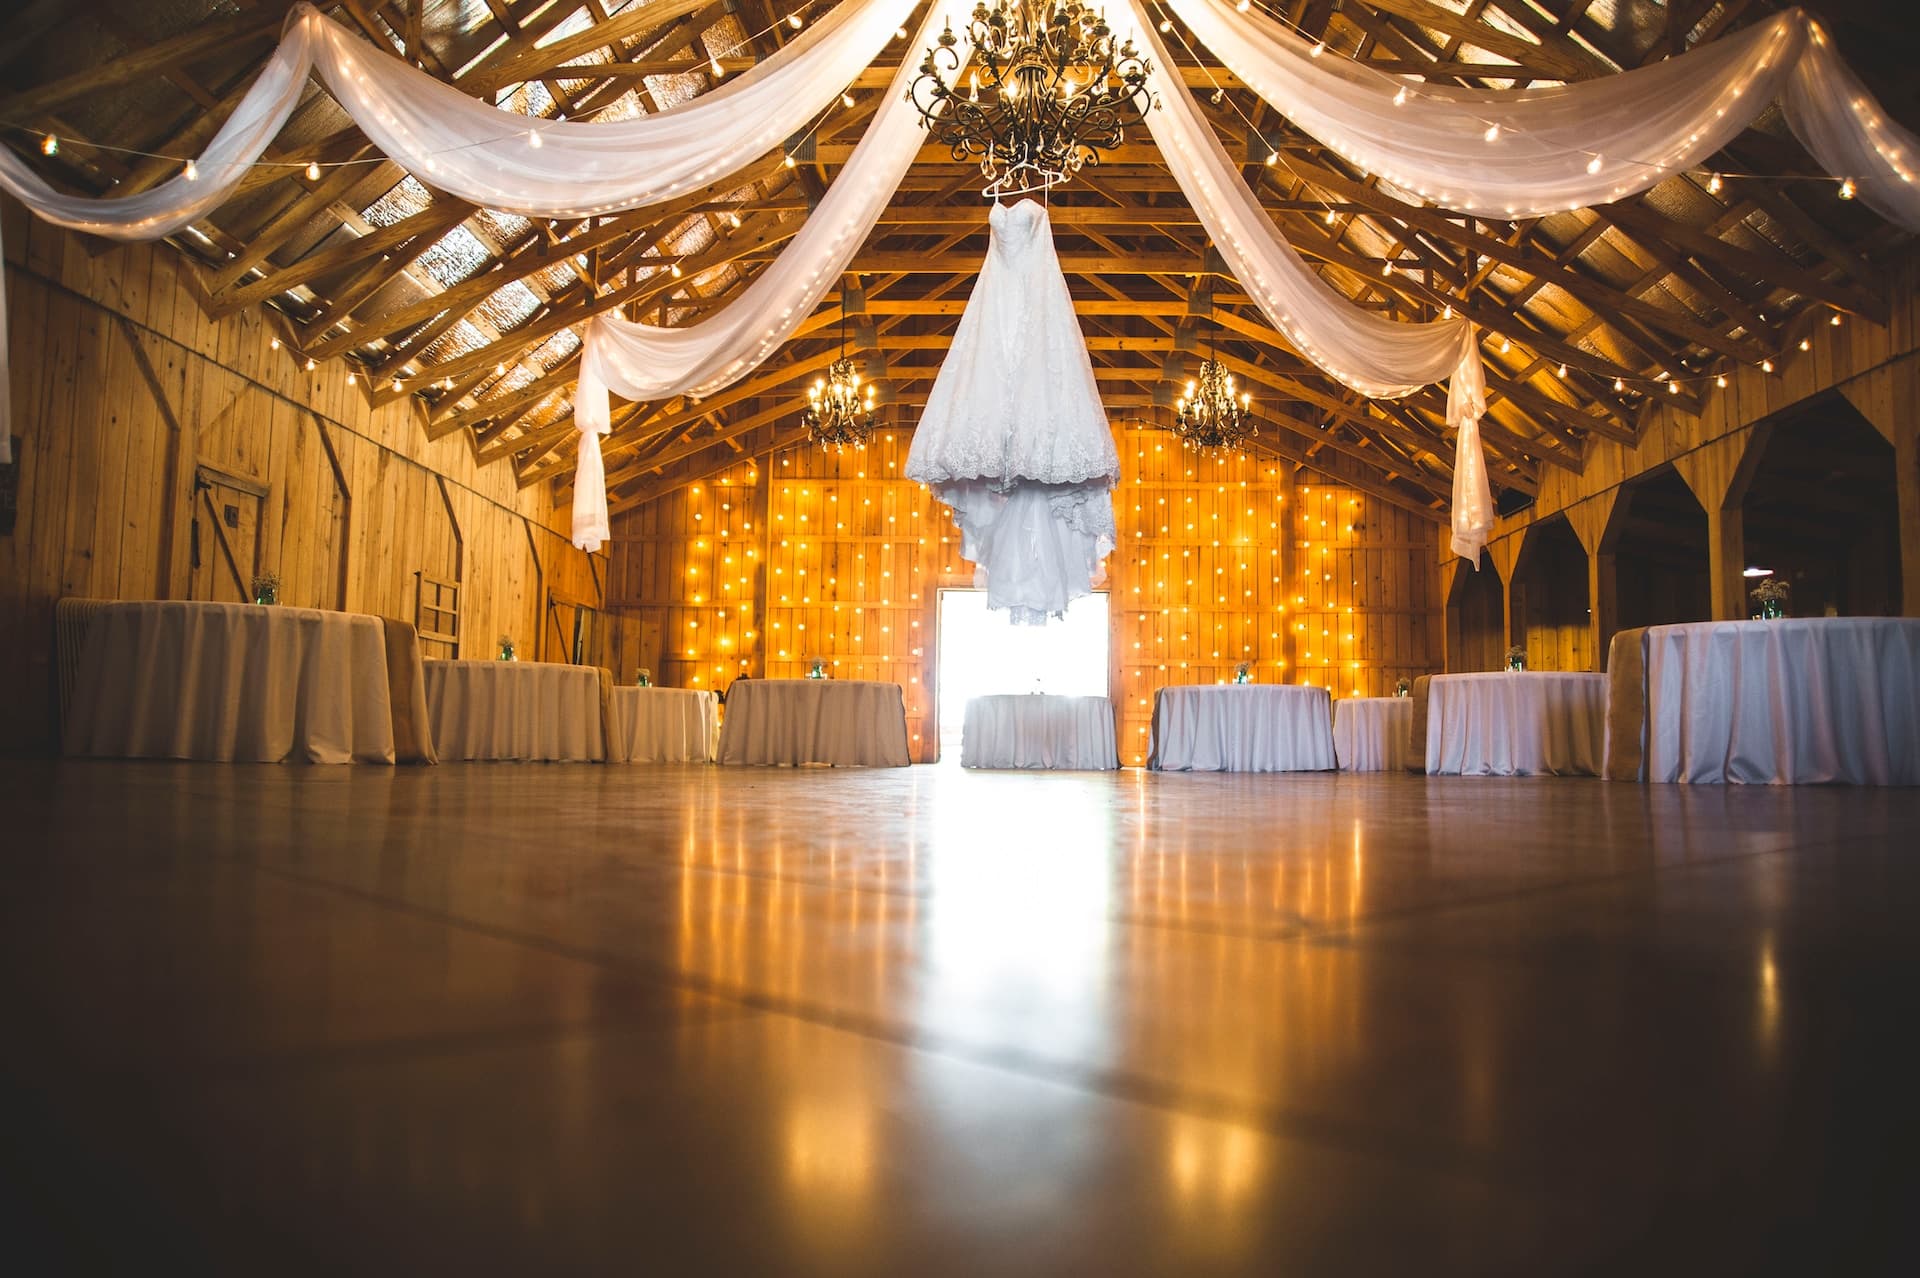 wedding venue in a barn with lights and drapes hanging from the ceiling